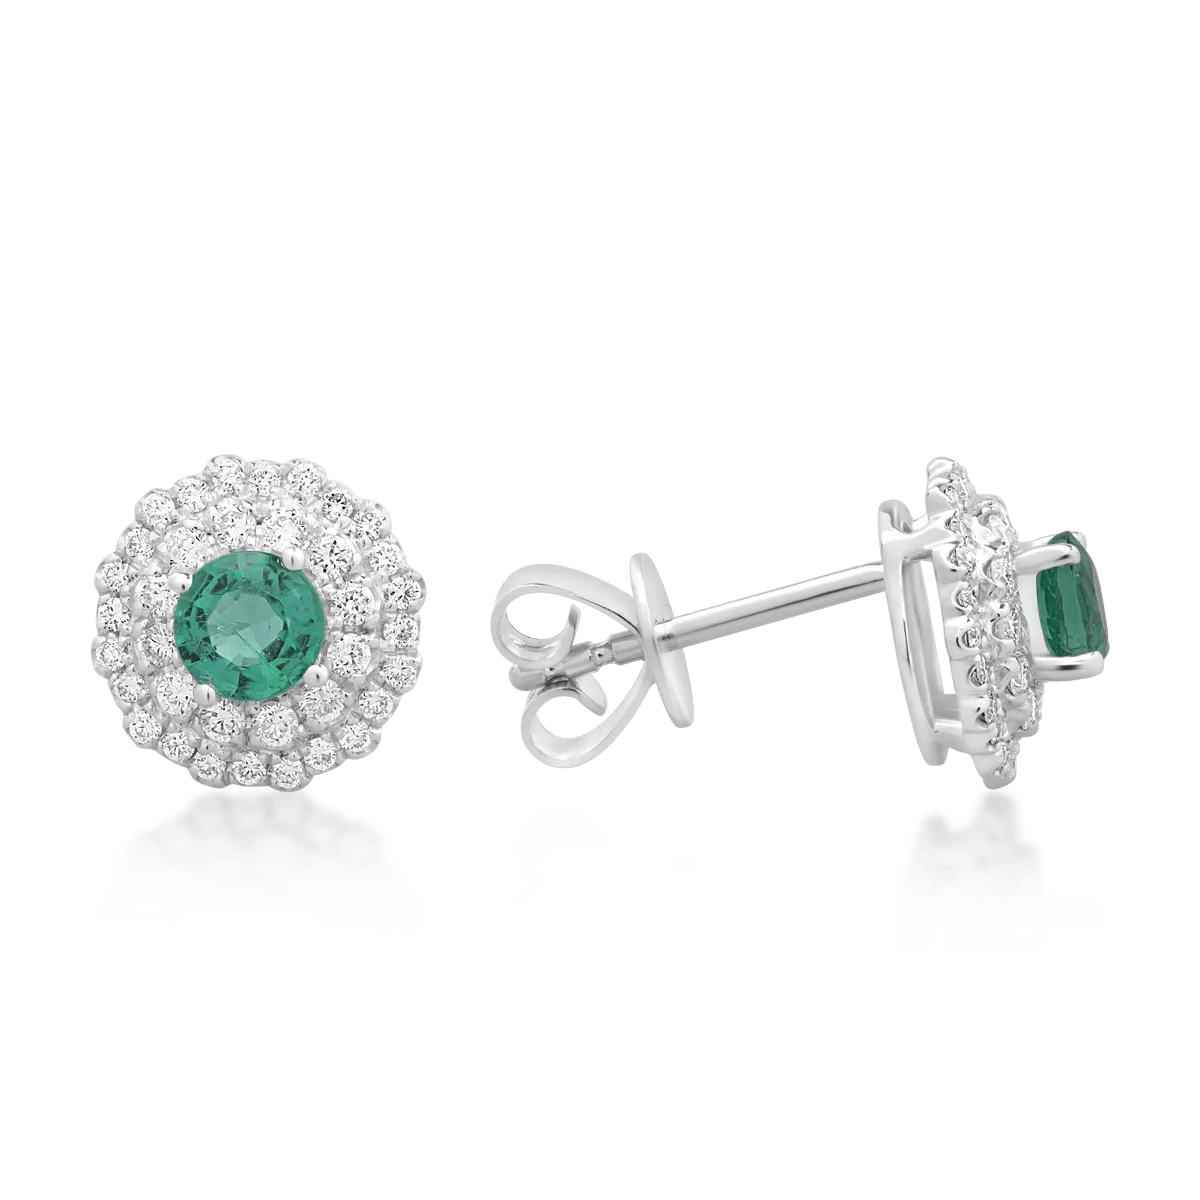 18K white gold earrings with 0.45ct emeralds and 0.34ct diamonds